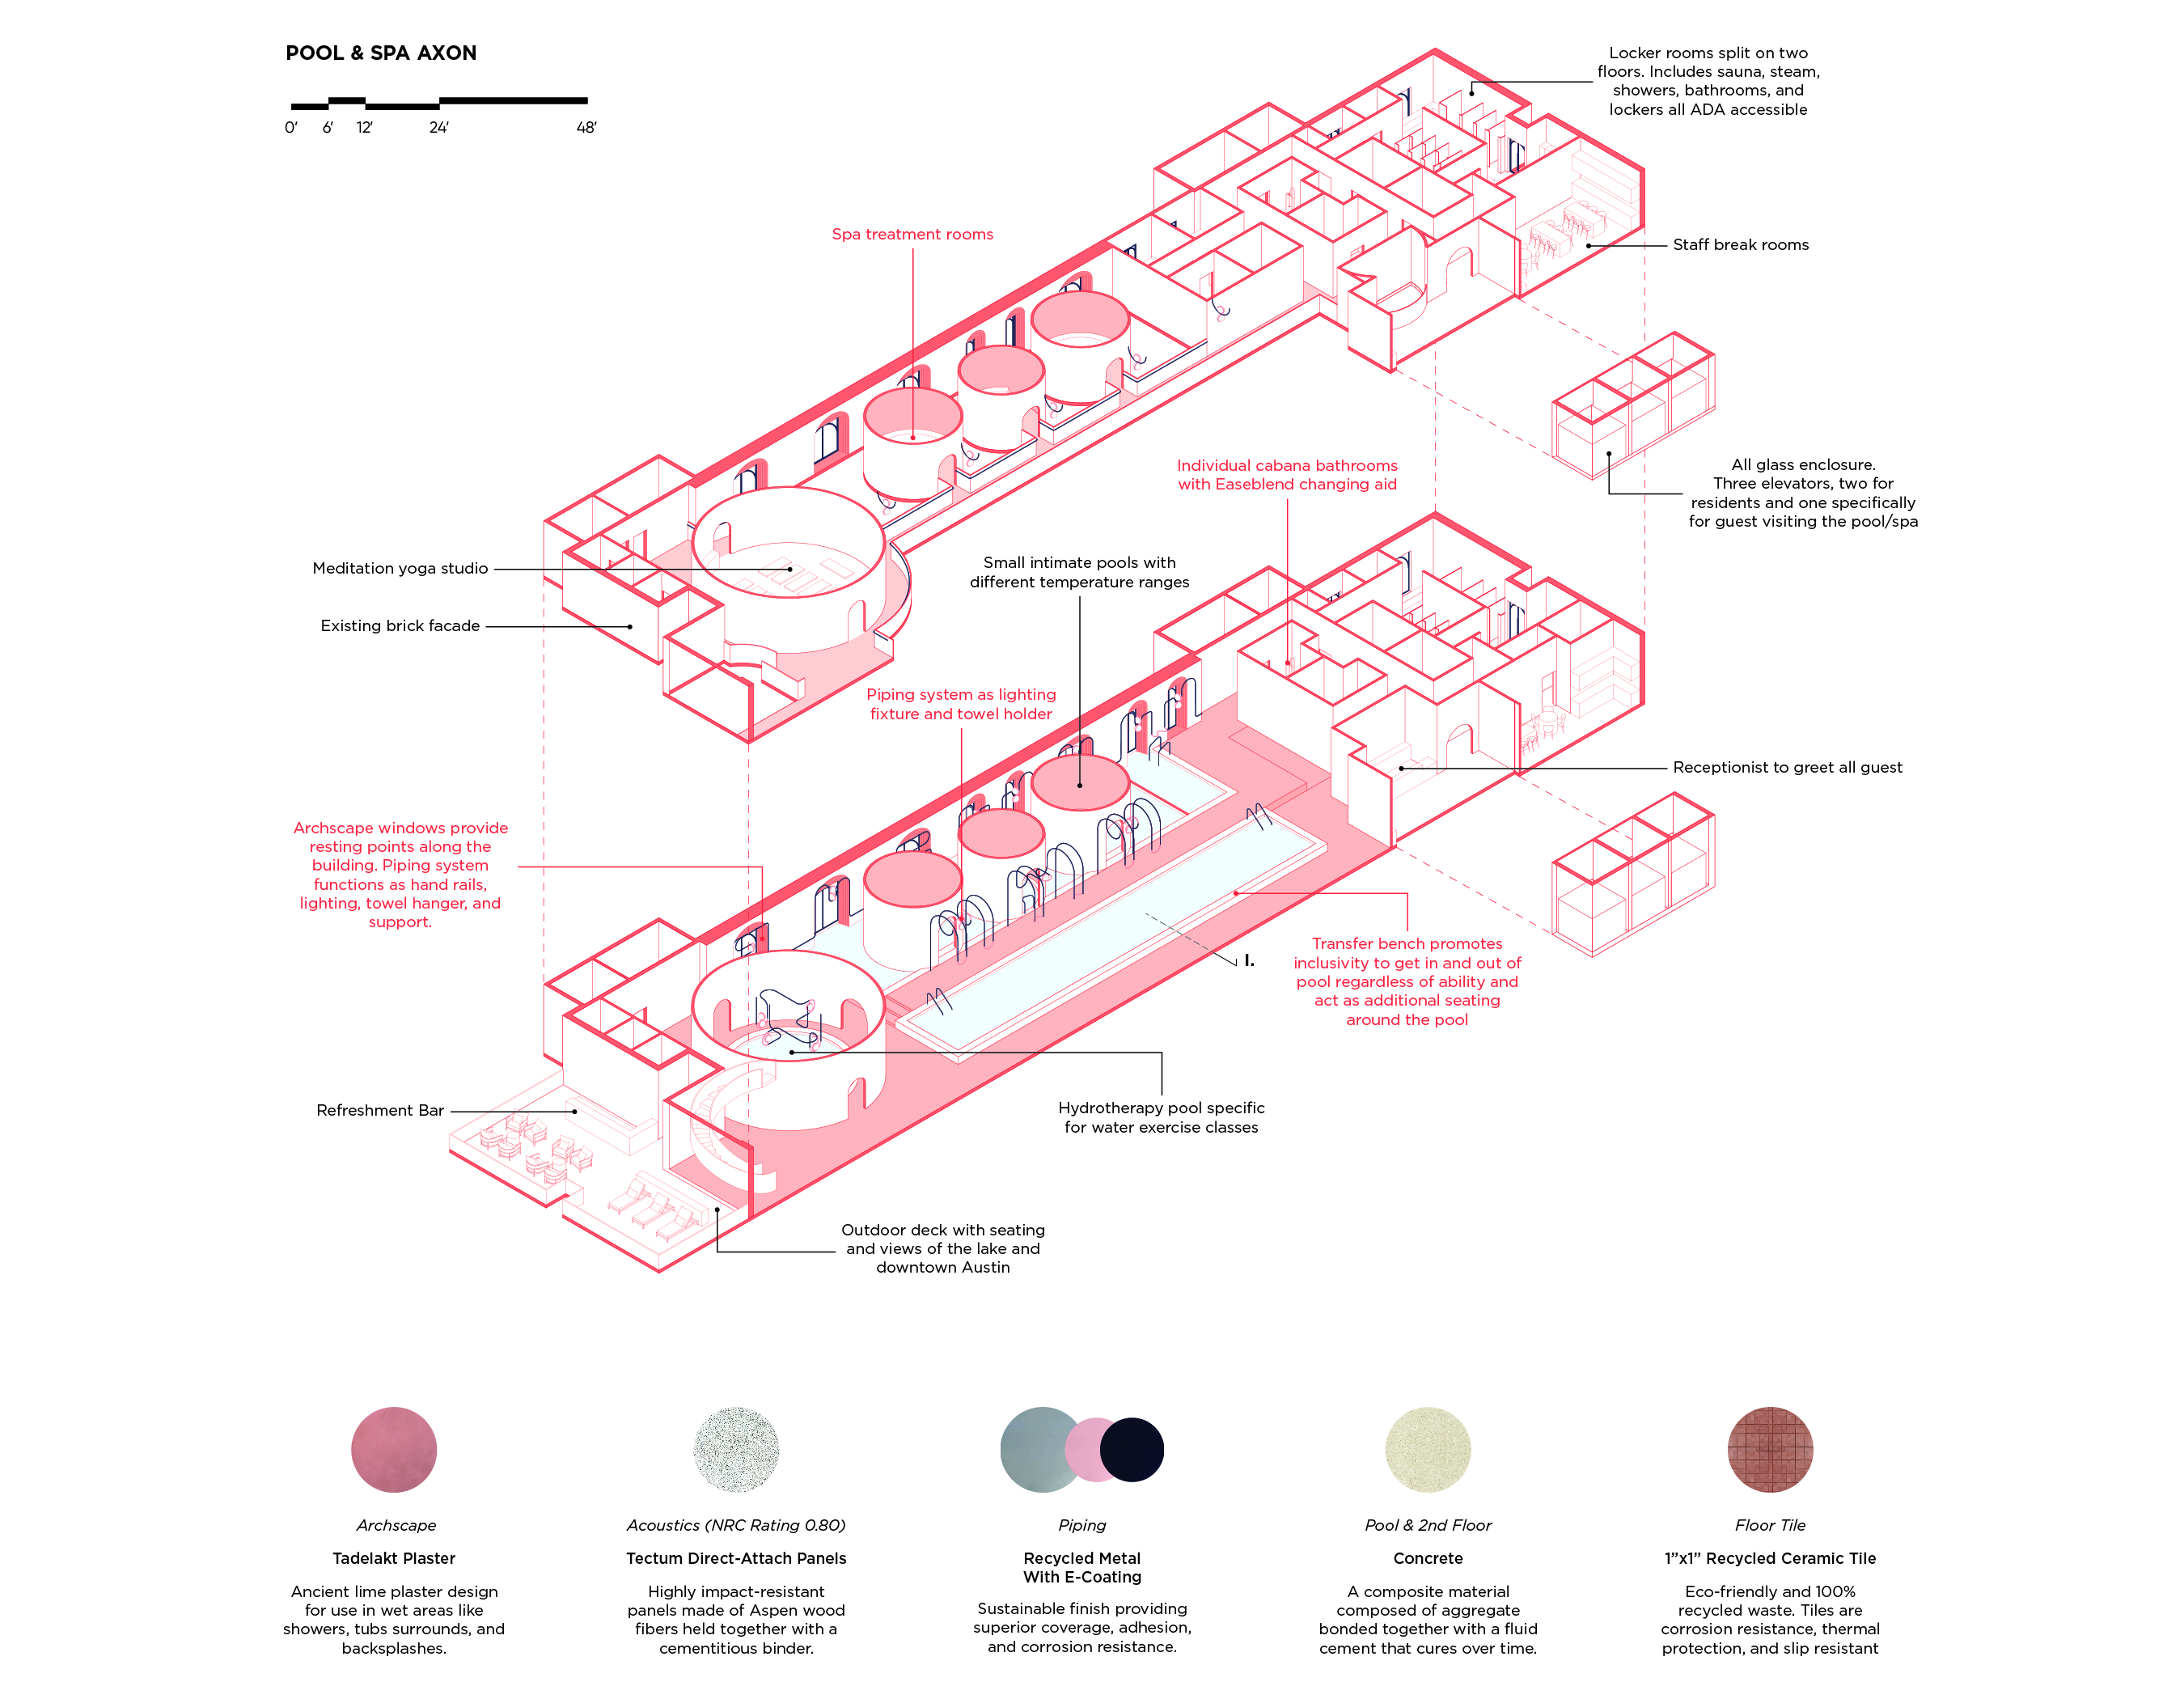 Axonometric view of Elements of Wellness' pool and spa areas.